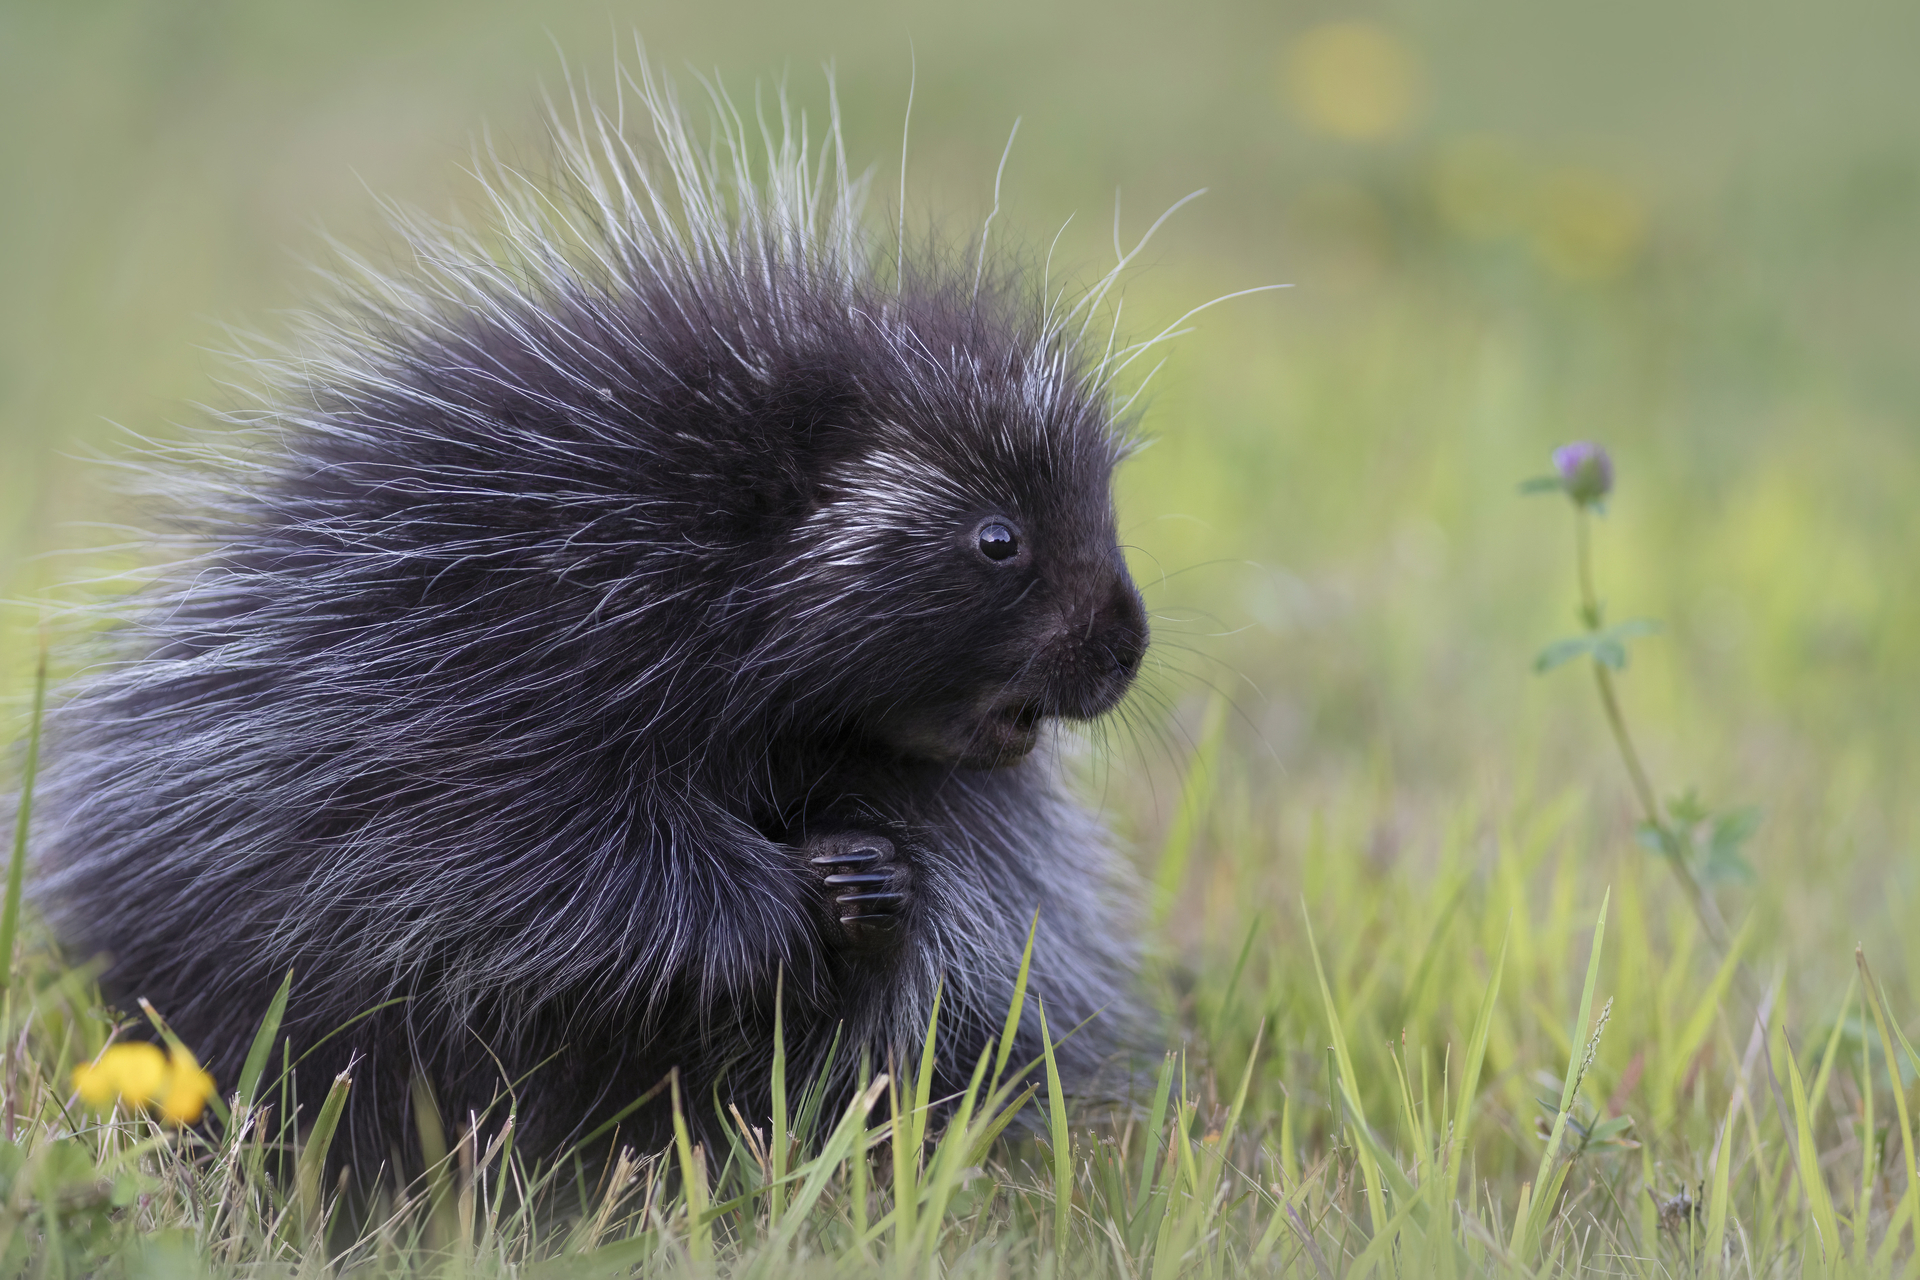 The porcupine that inhabits northern Minnesota is well known for